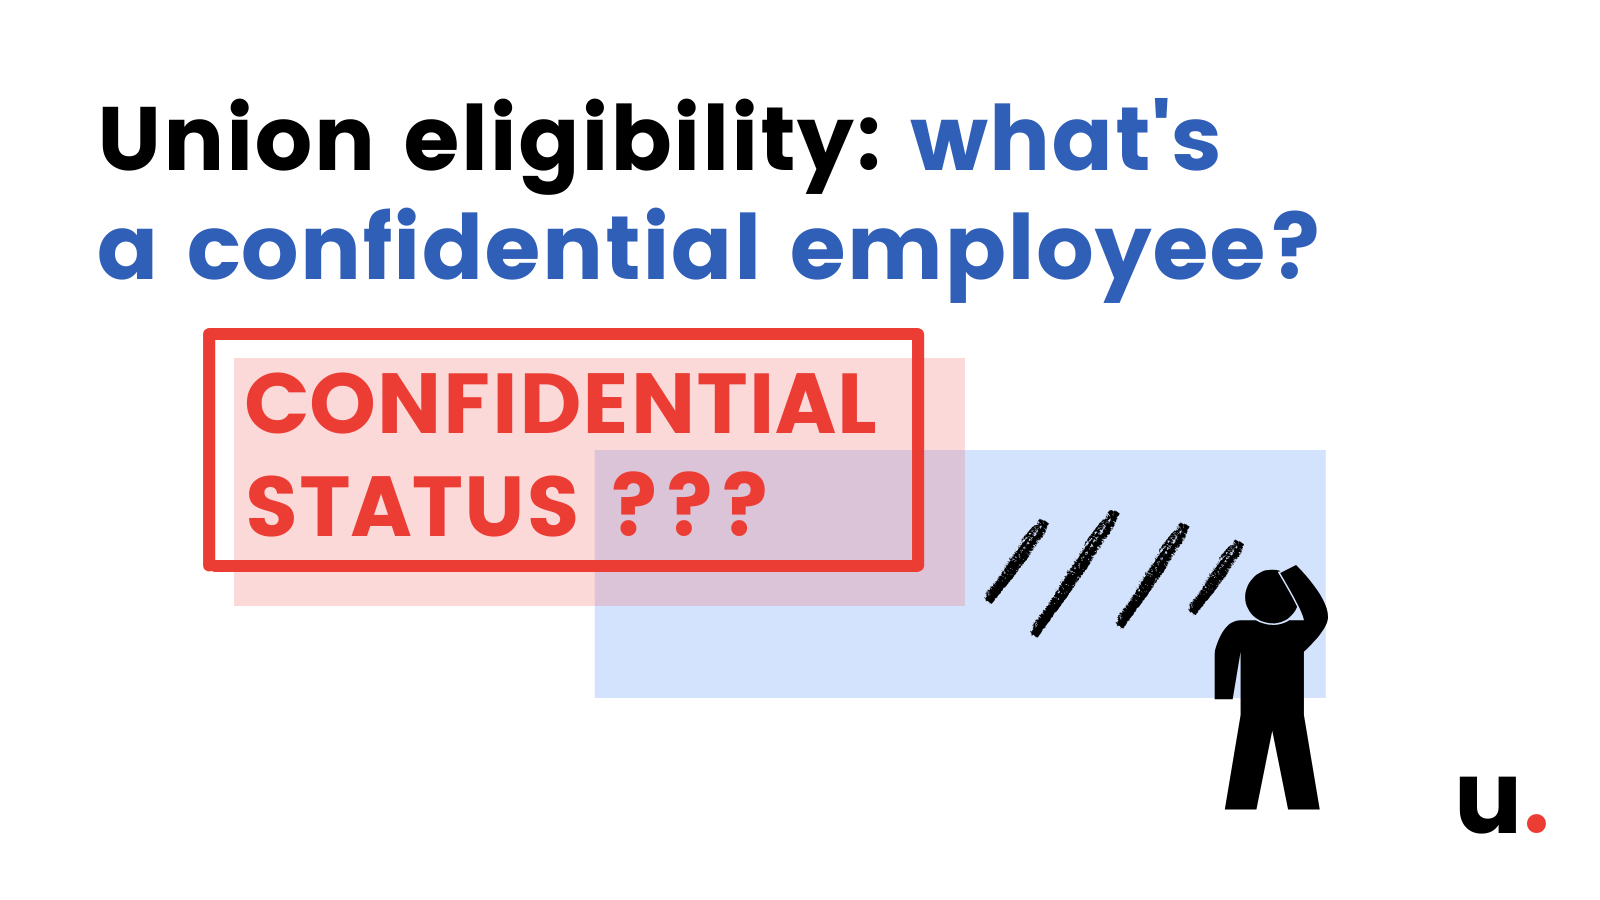 Union eligibility: What’s a confidential employee?